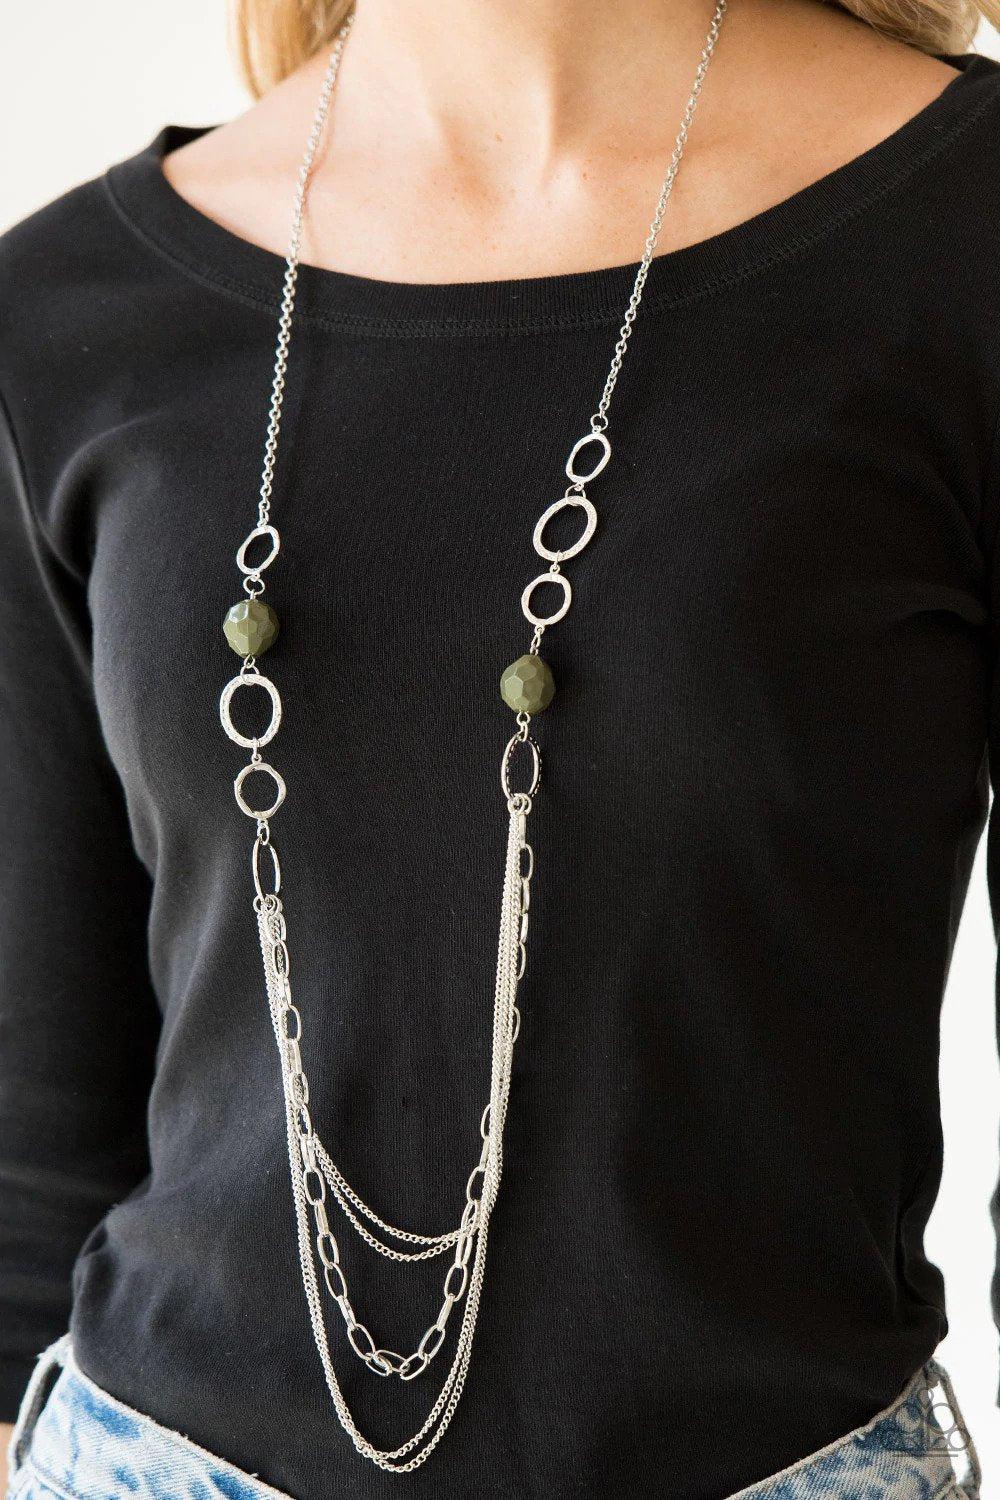 Margarita Masquerades Green Necklaces - Paparazzi Accessories- lightbox - CarasShop.com - $5 Jewelry by Cara Jewels